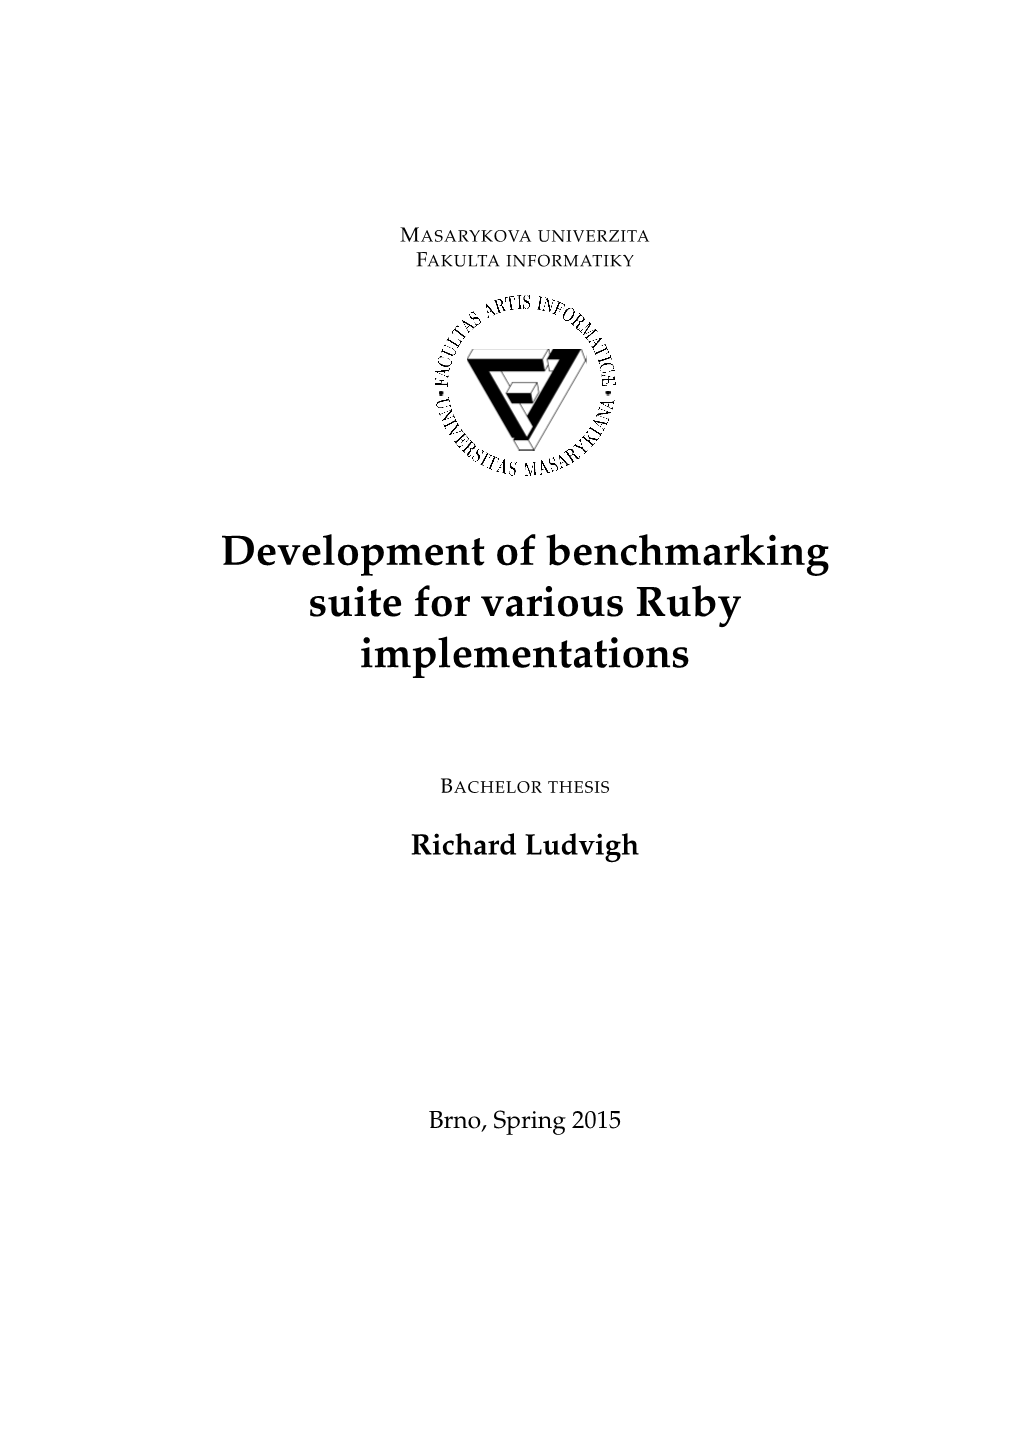 Development of Benchmarking Suite for Various Ruby Implementations